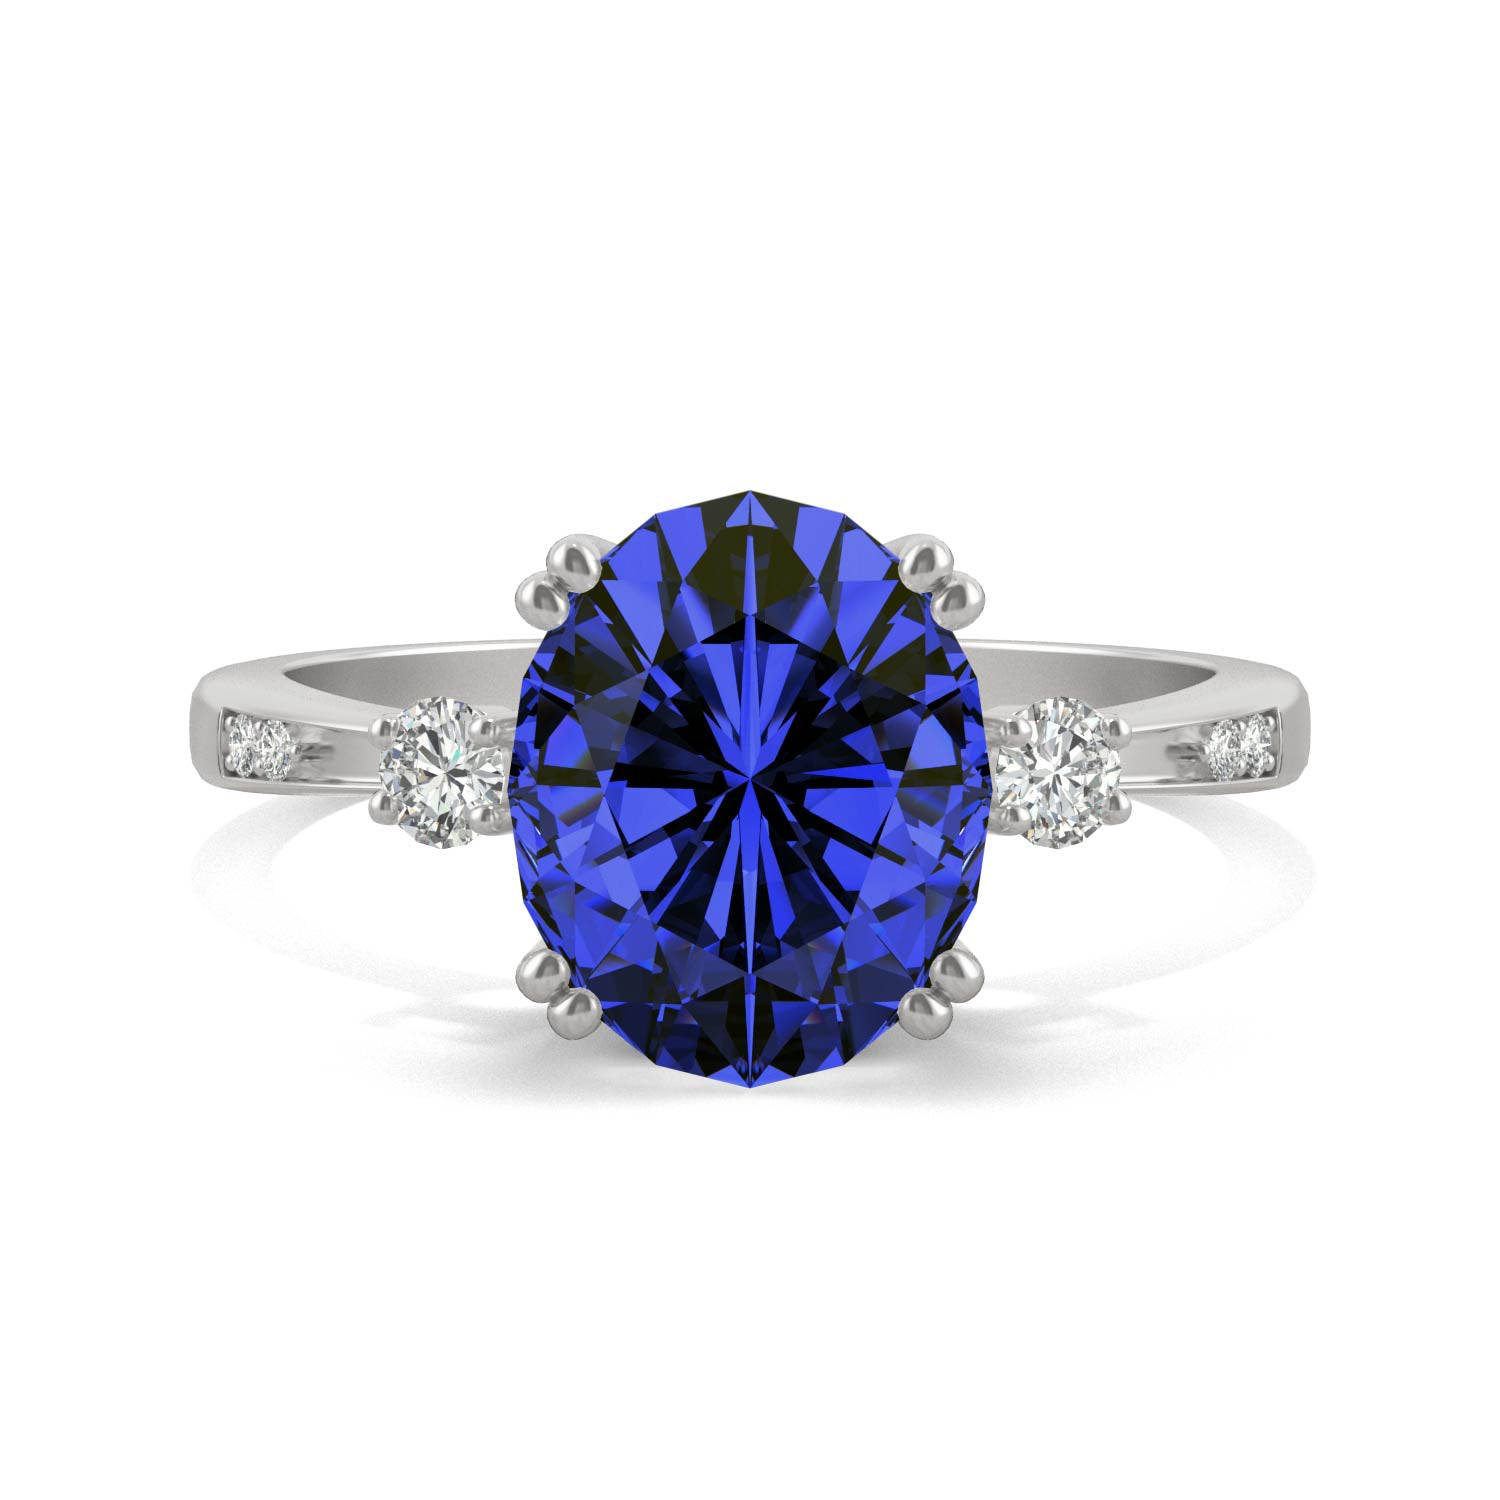 3.64 CTW DEW Oval Sapphire Basket Ring in 14K White Gold